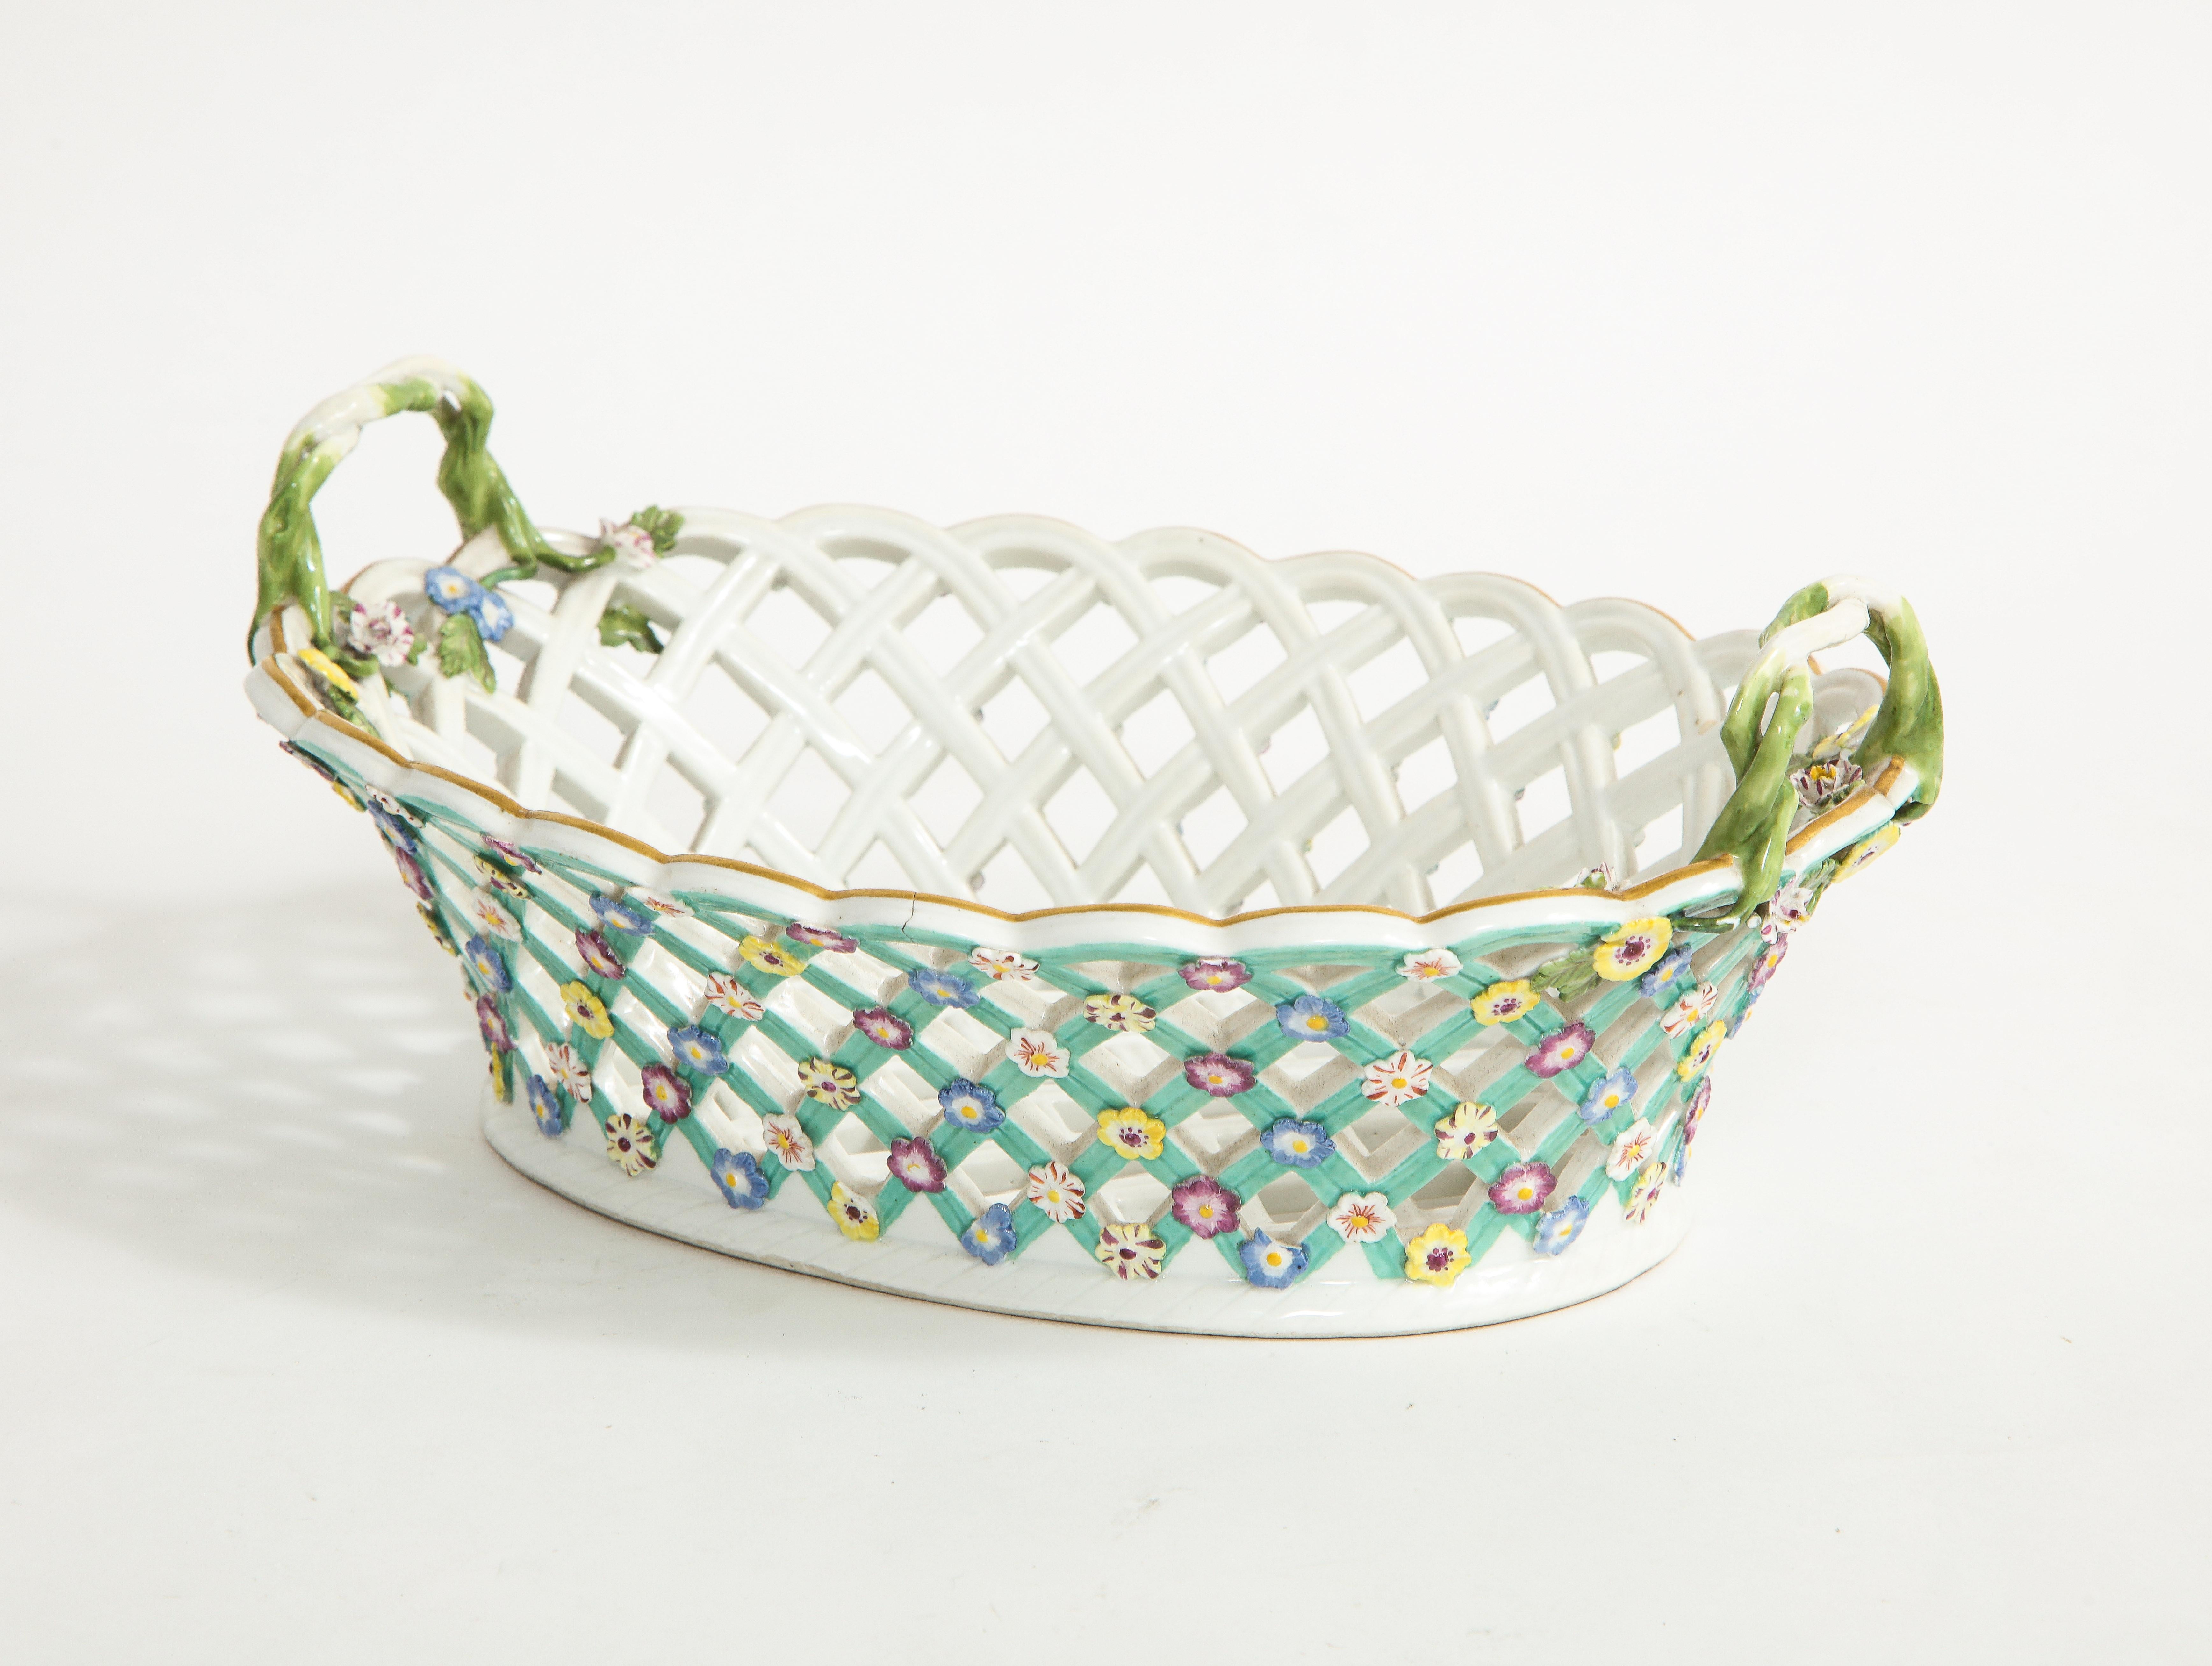 18th C. Meissen Porcelain Lattice Filigree Reticulated Basket w/ Vine Handles In Good Condition For Sale In New York, NY